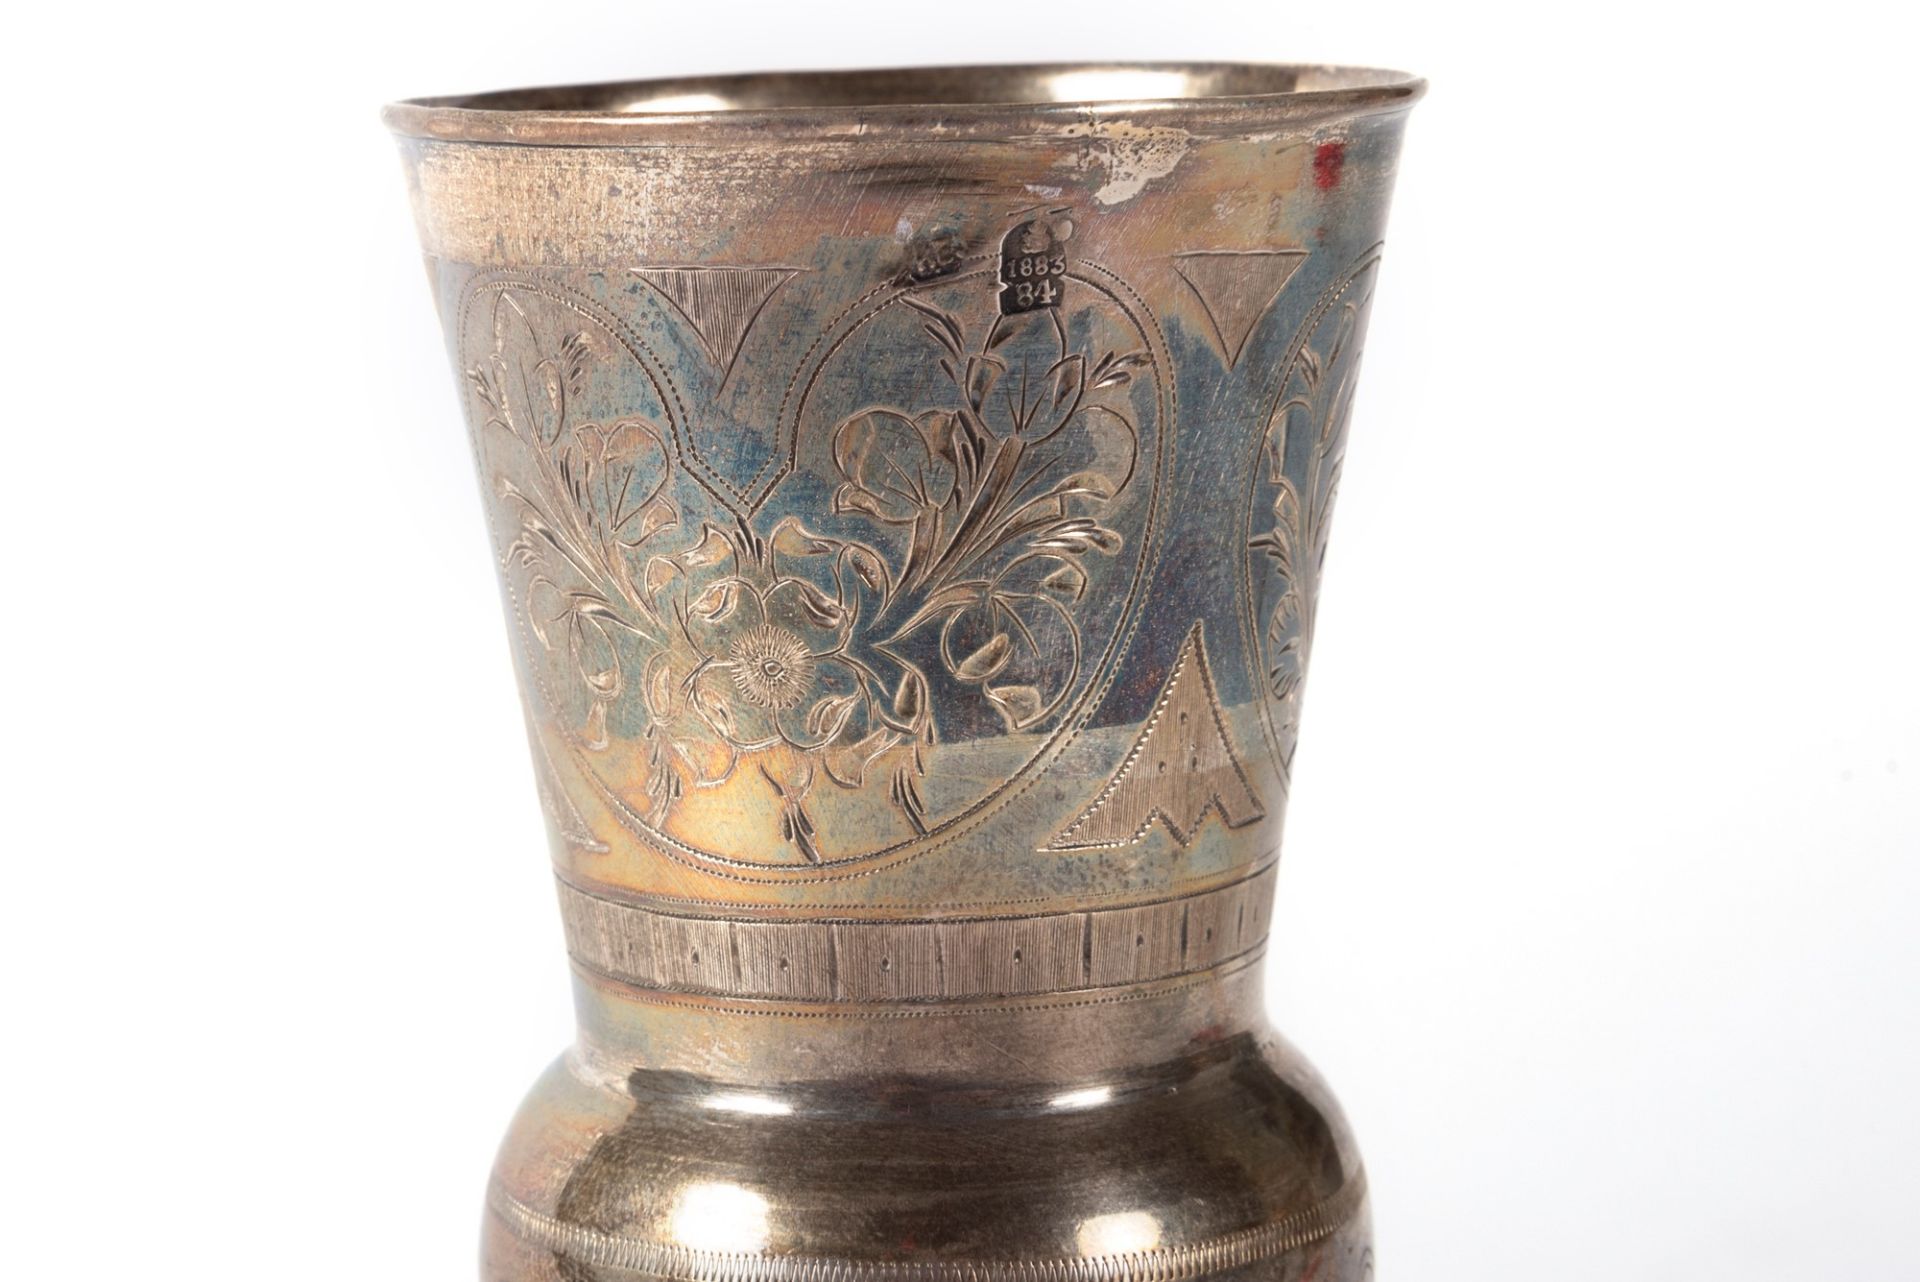 Small silver goblet, Russia, 19th century - Image 2 of 3